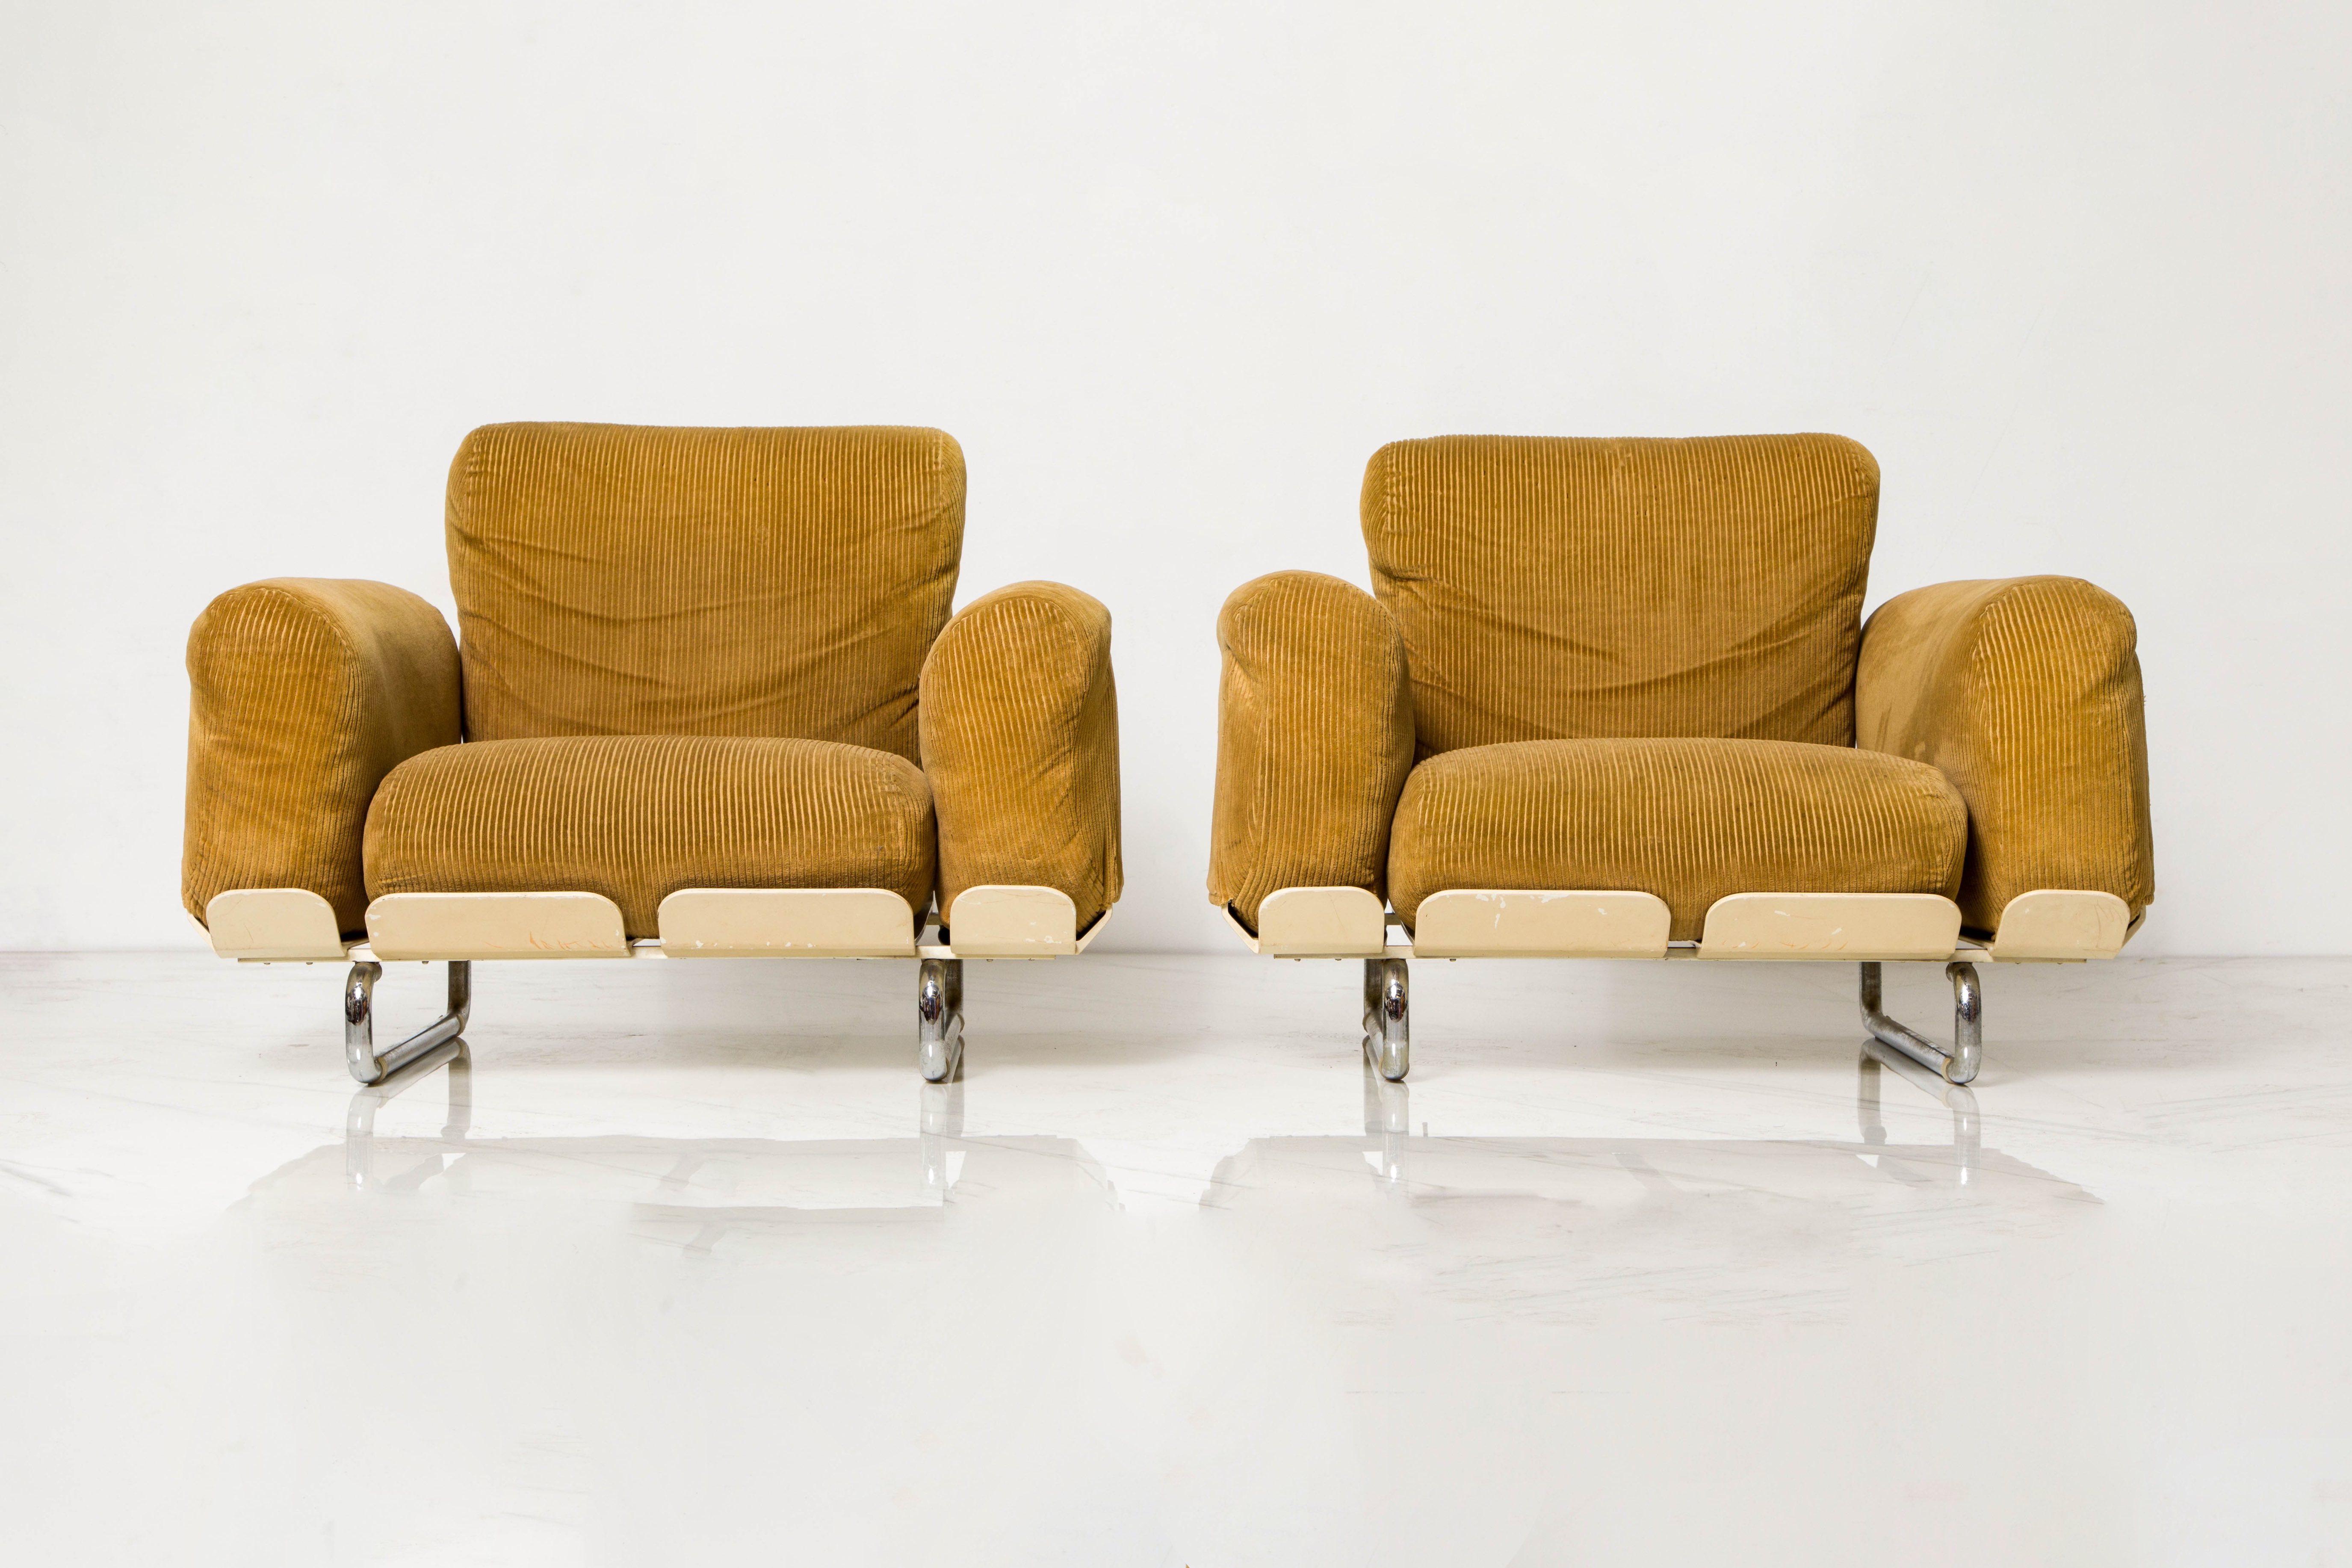 A rare pair of 'Senzafine' lounge chairs, circa 1969, by Eleonore Peduzzi Riva for Zanotta, Italy. Signed underneath each chair with embossed details (see photos) stating the model name, designer name and Zanotta's branded stamp. 

Priced as a